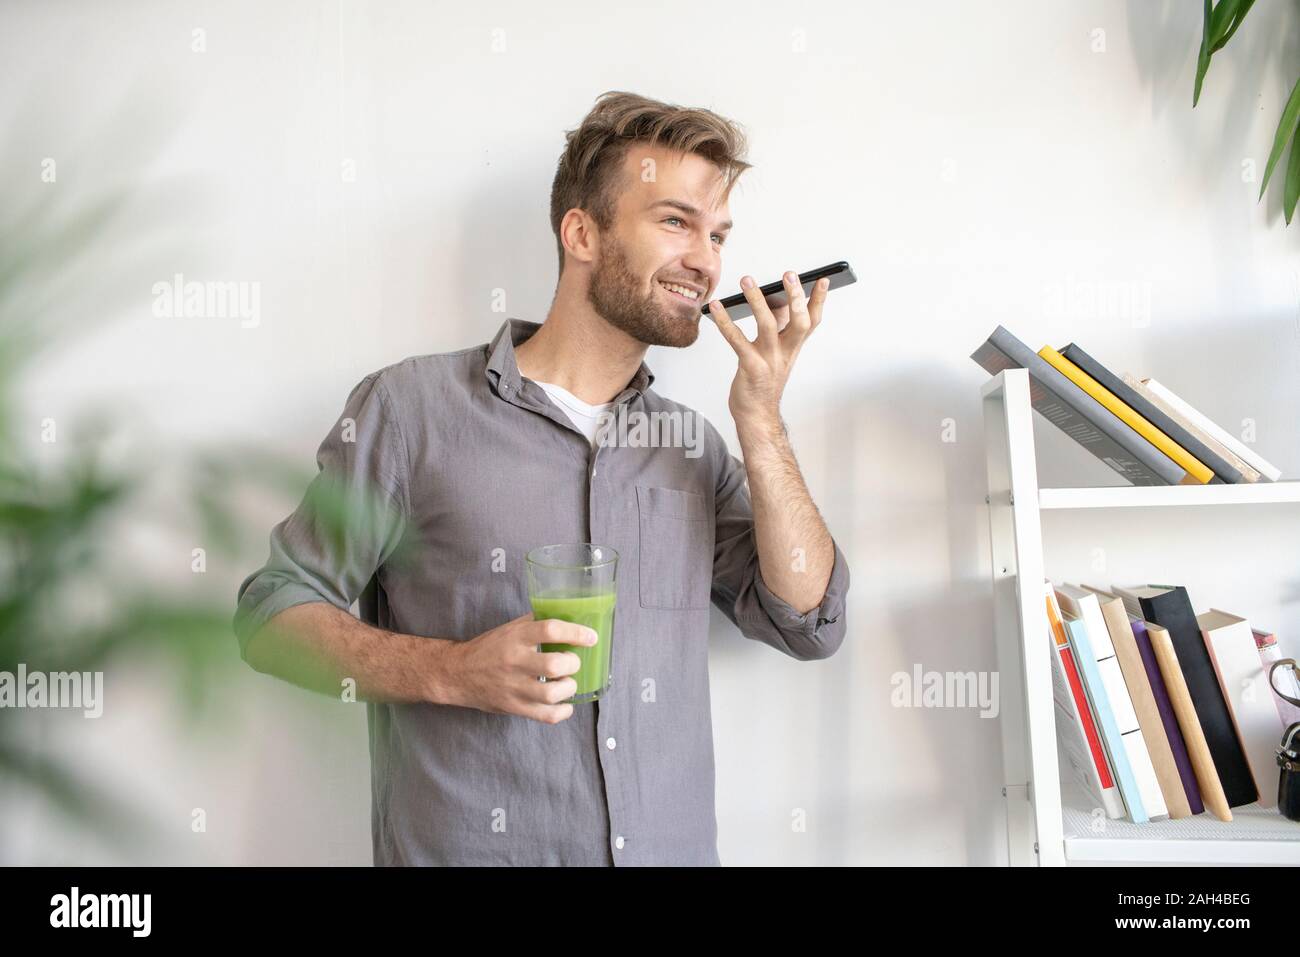 Smiling man using smartphone in office Banque D'Images